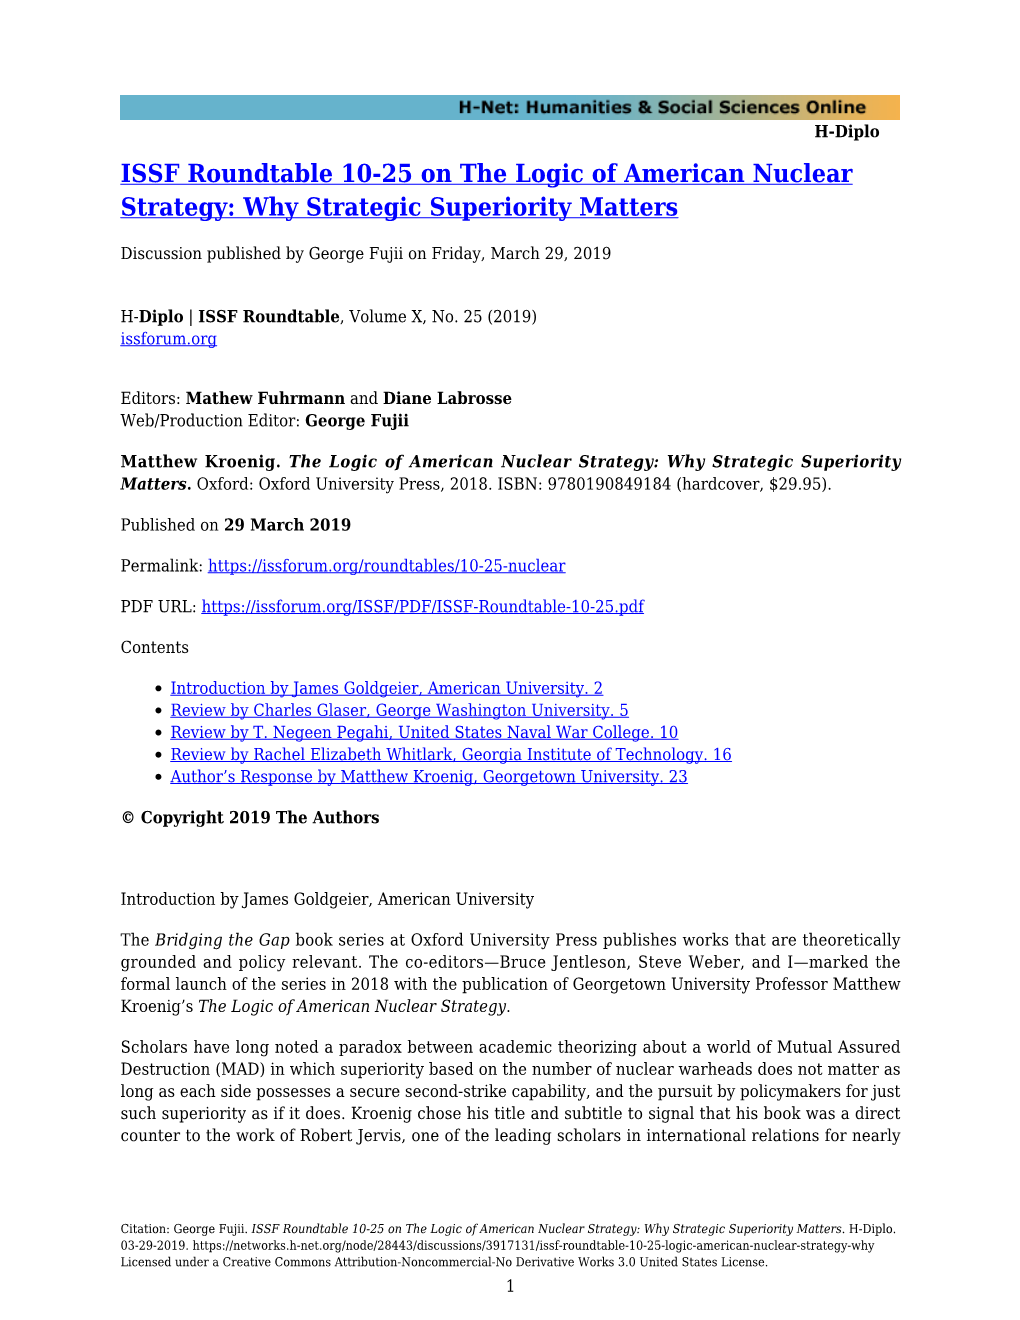 ISSF Roundtable 10-25 on the Logic of American Nuclear Strategy: Why Strategic Superiority Matters